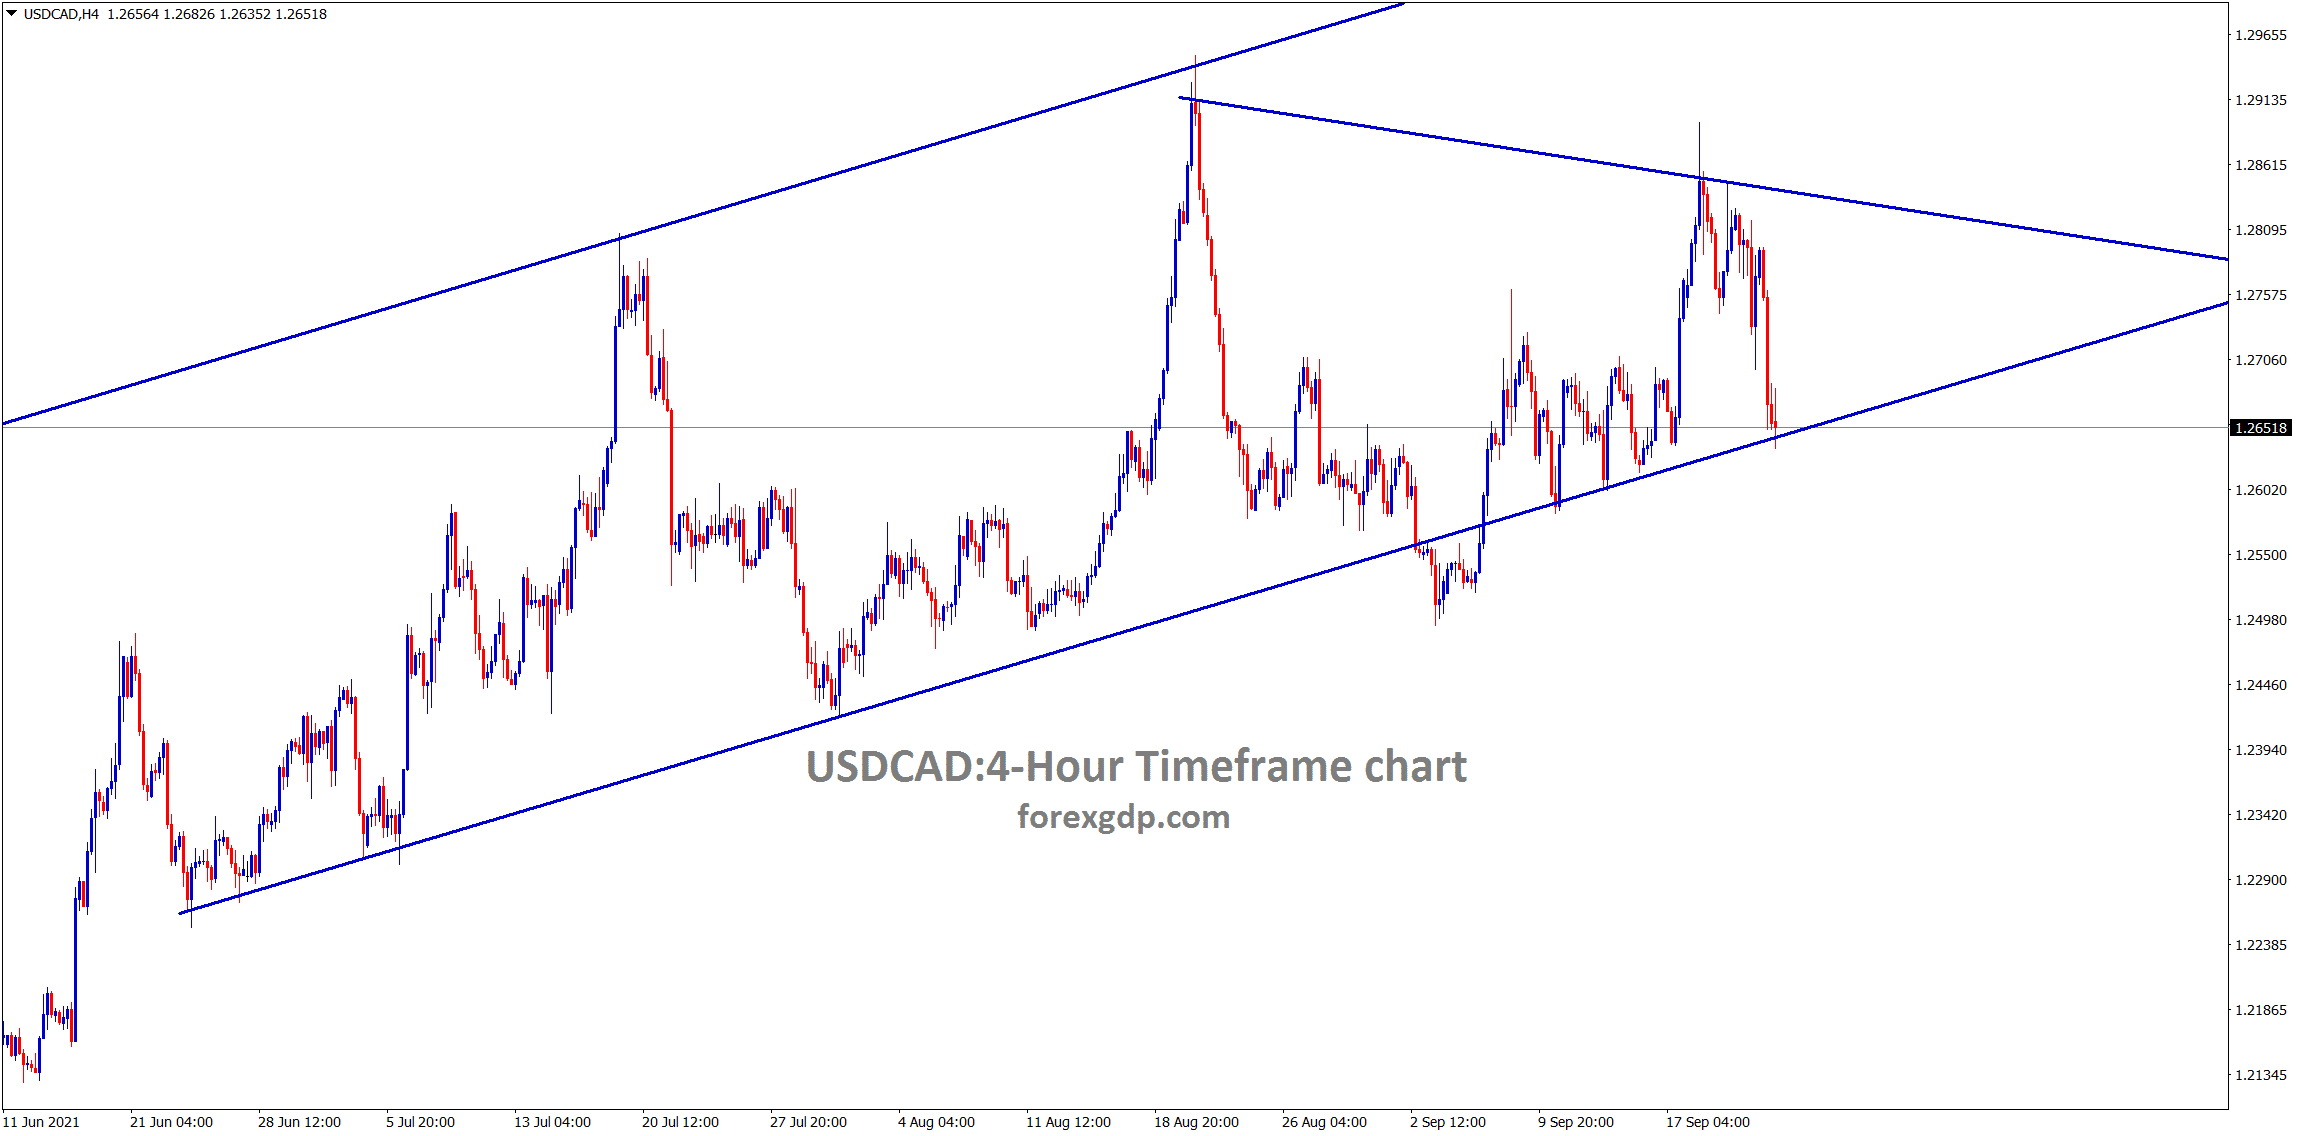 USDCAD hits the higher low area of the uptrend line wait for reversal or consolidation